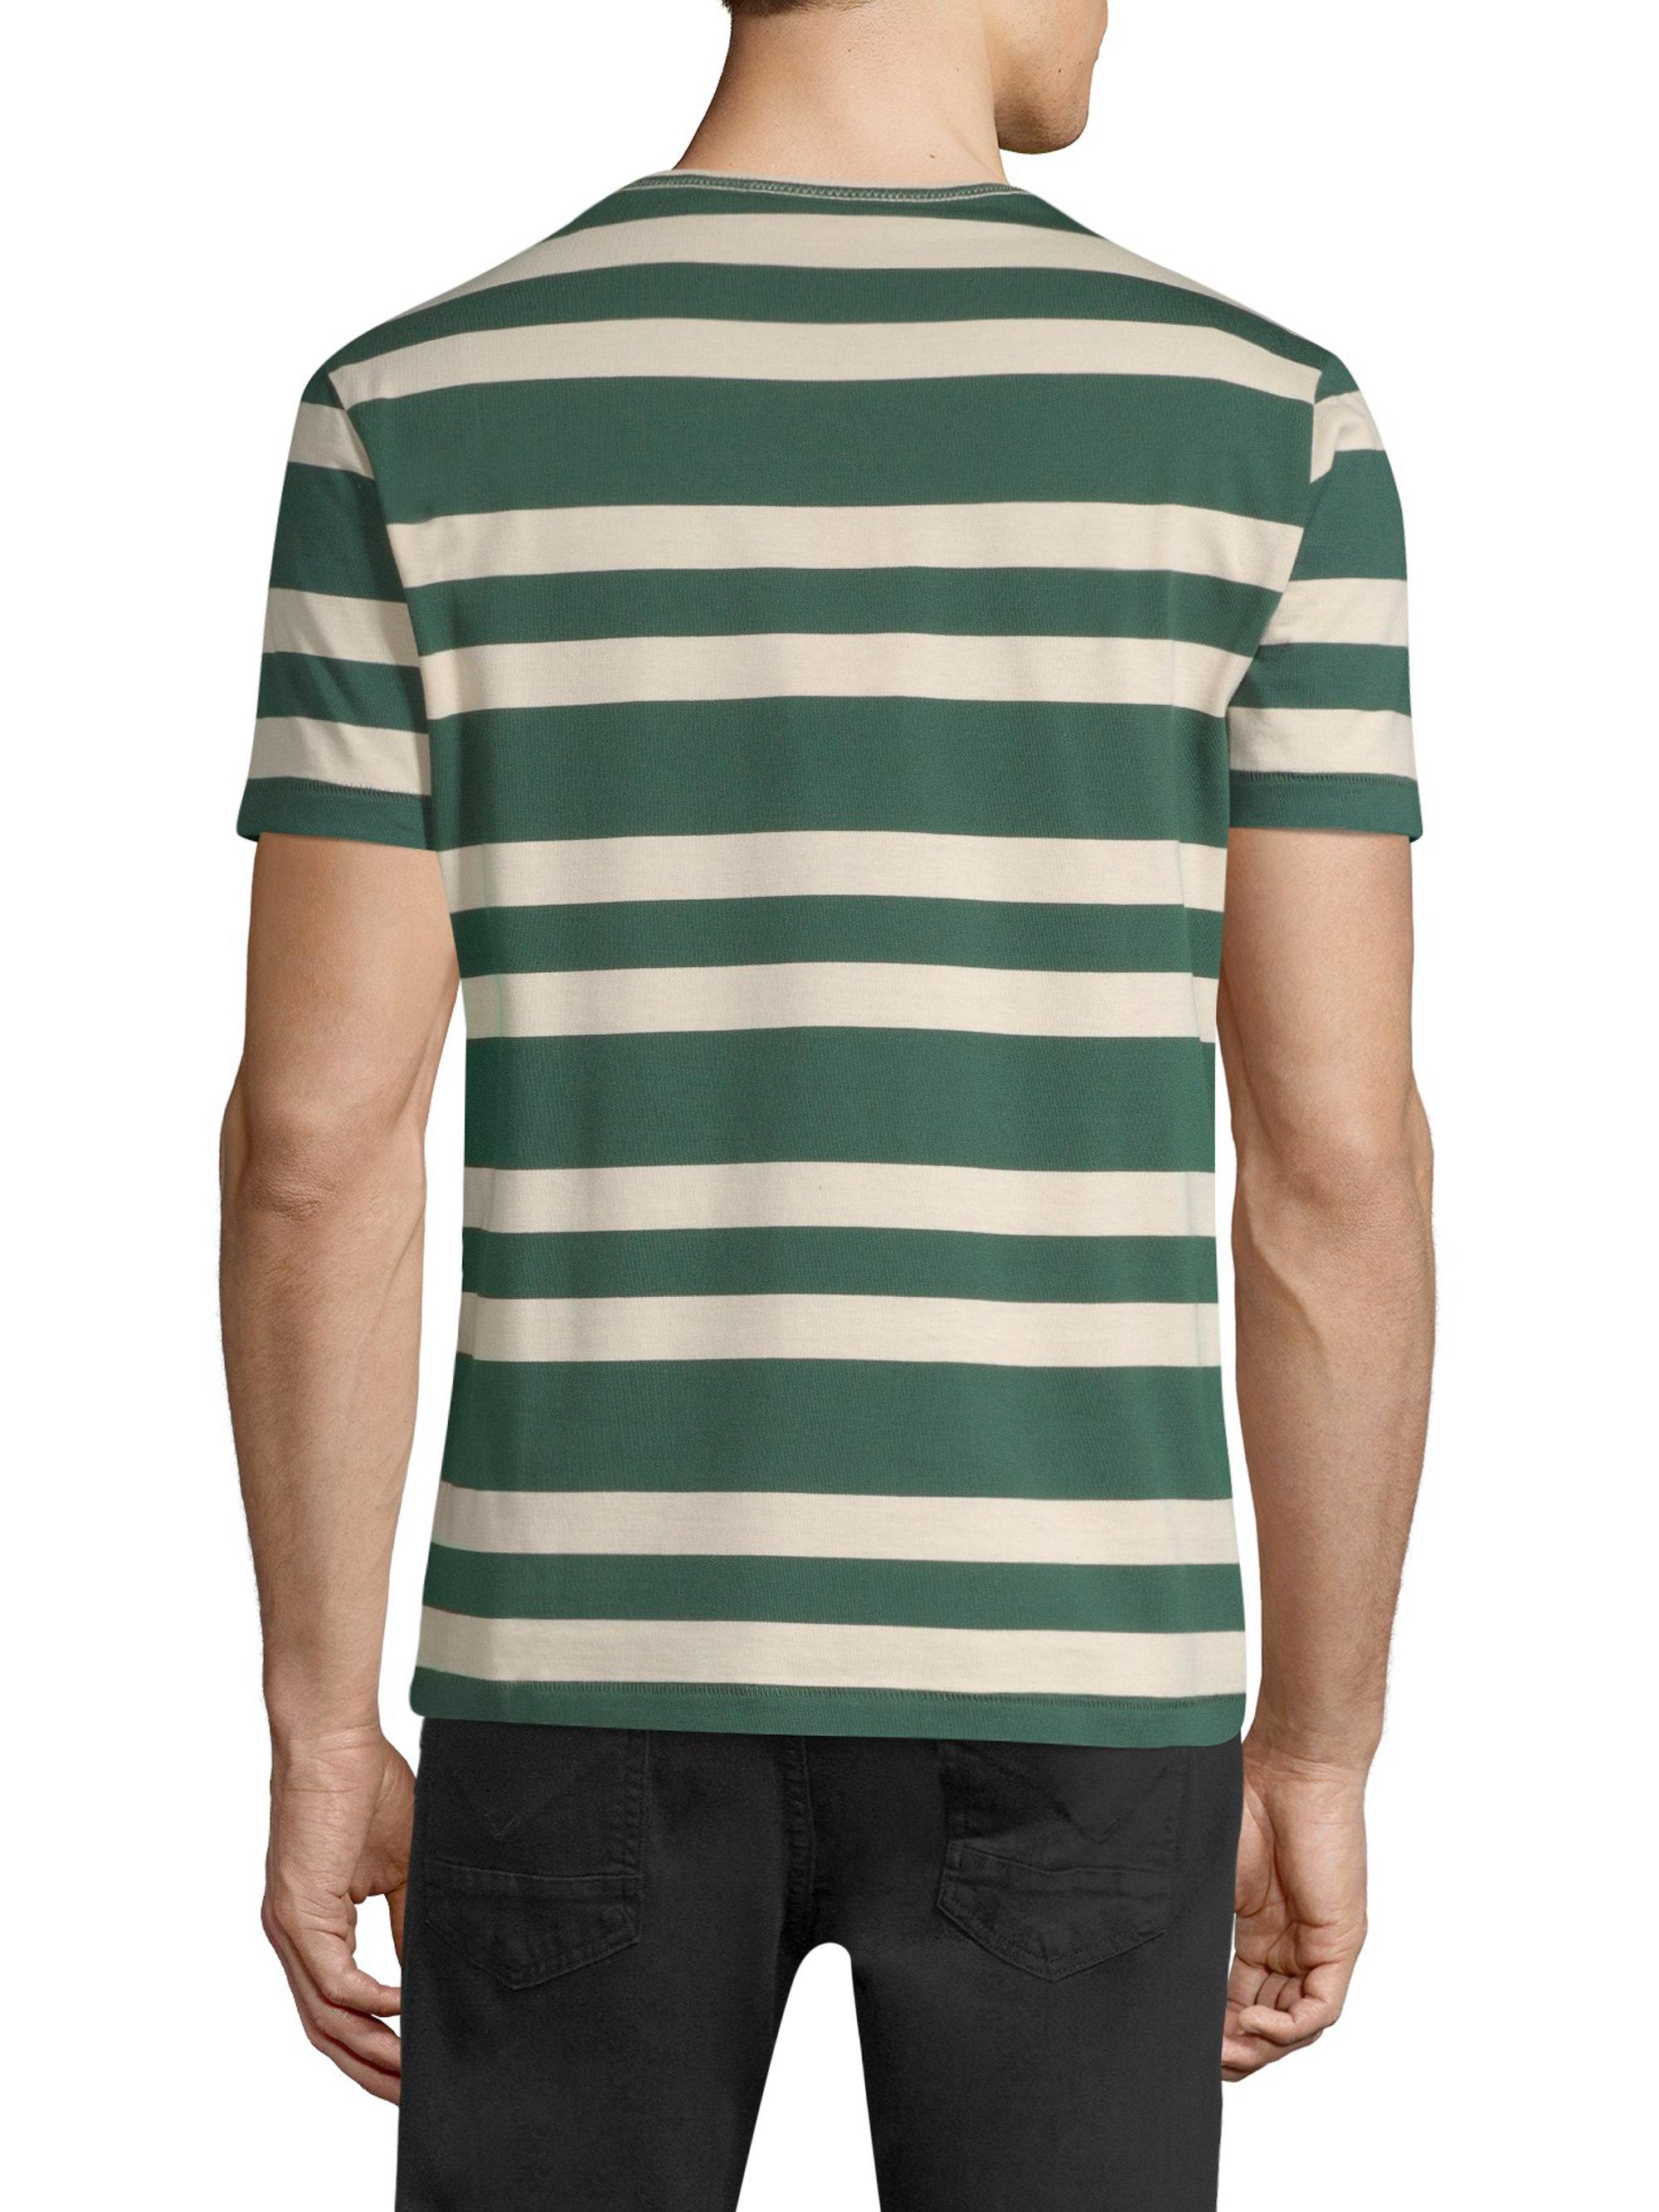 Burberry Striped Cotton Tee in Green for Men - Lyst